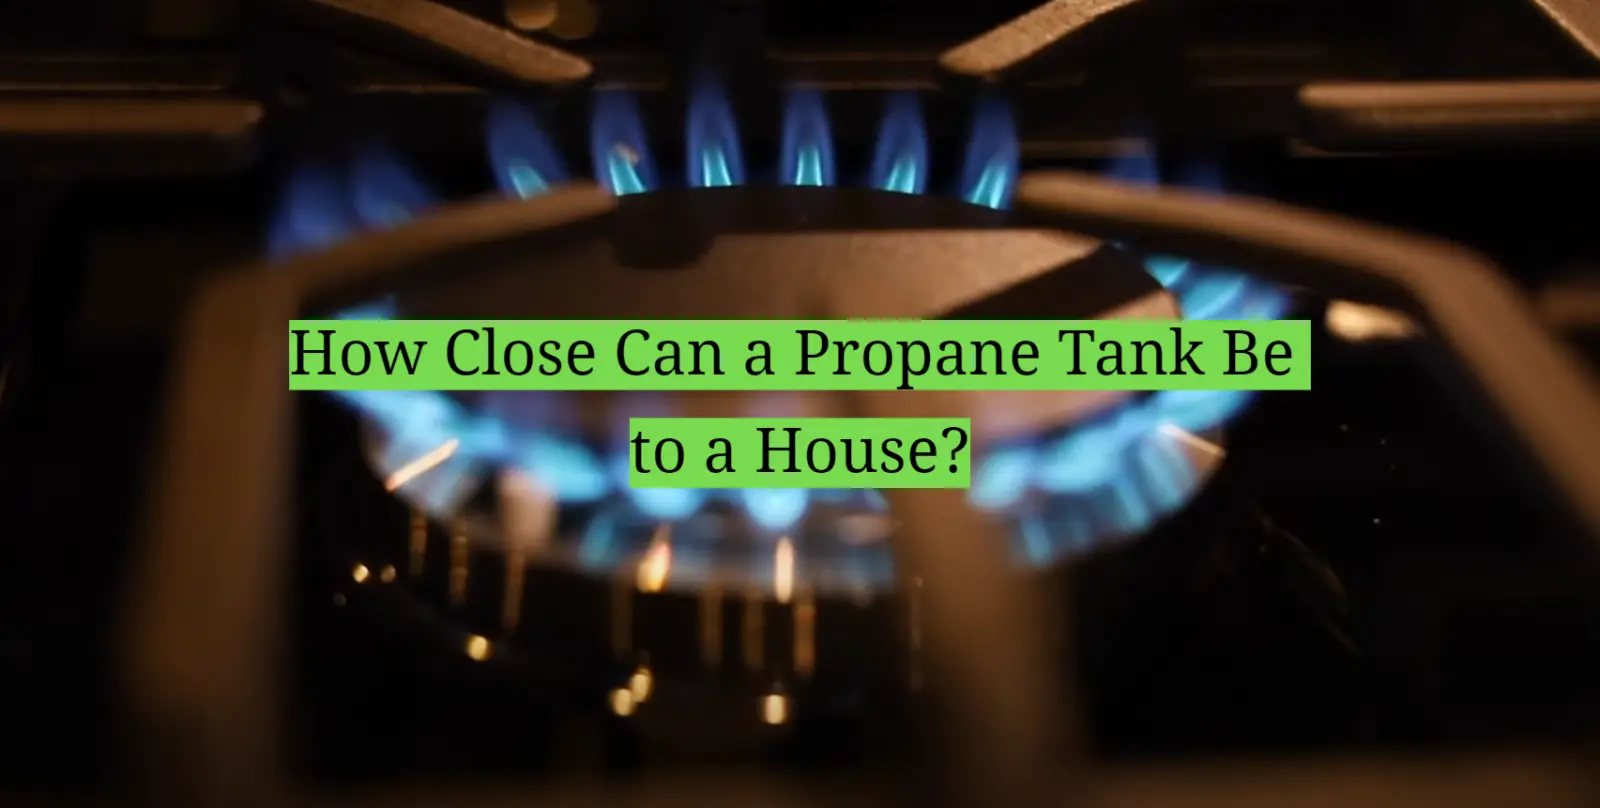 How Close Can a Propane Tank Be to a House?